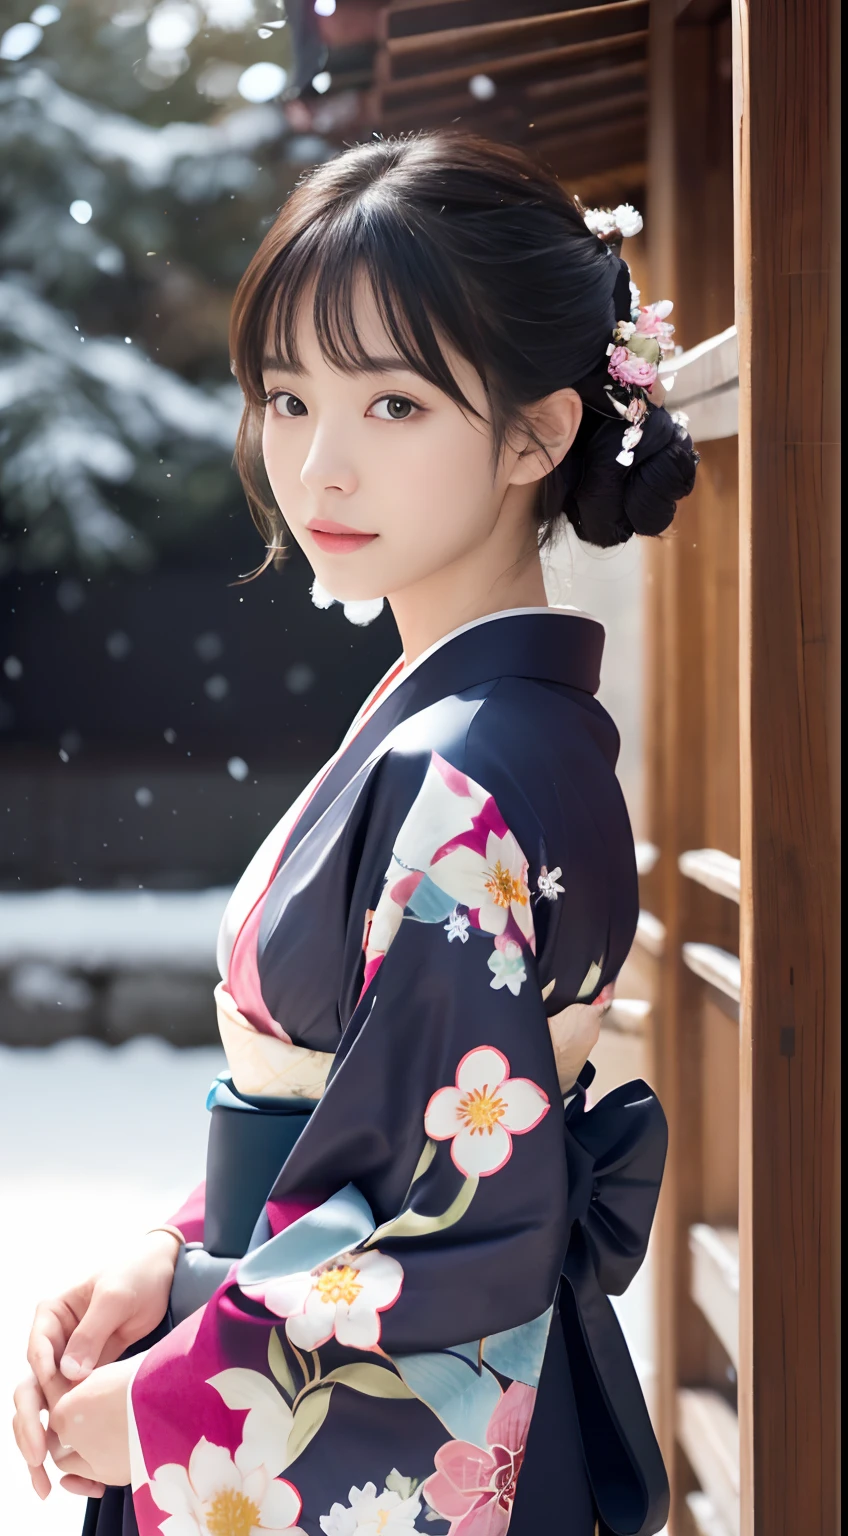 (Kimono)、、(top-quality,​masterpiece:1.3,超A high resolution,),(ultra-detailliert,Caustics),(Photorealsitic:1.4,RAW shooting,)Ultra-realistic capture,A highly detailed,High resolution 16K high resolution image of a woman in a kimono，resolutionfor human skin、 Skin texture is natural、、The skin looks healthy with an even tone、 Use natural light and color,One Woman,japanes,,kawaii,A dark-haired,Middle hair,(Falling snow:1.3)、(Hair swaying in the wind:1.2)、In front of the shrine，